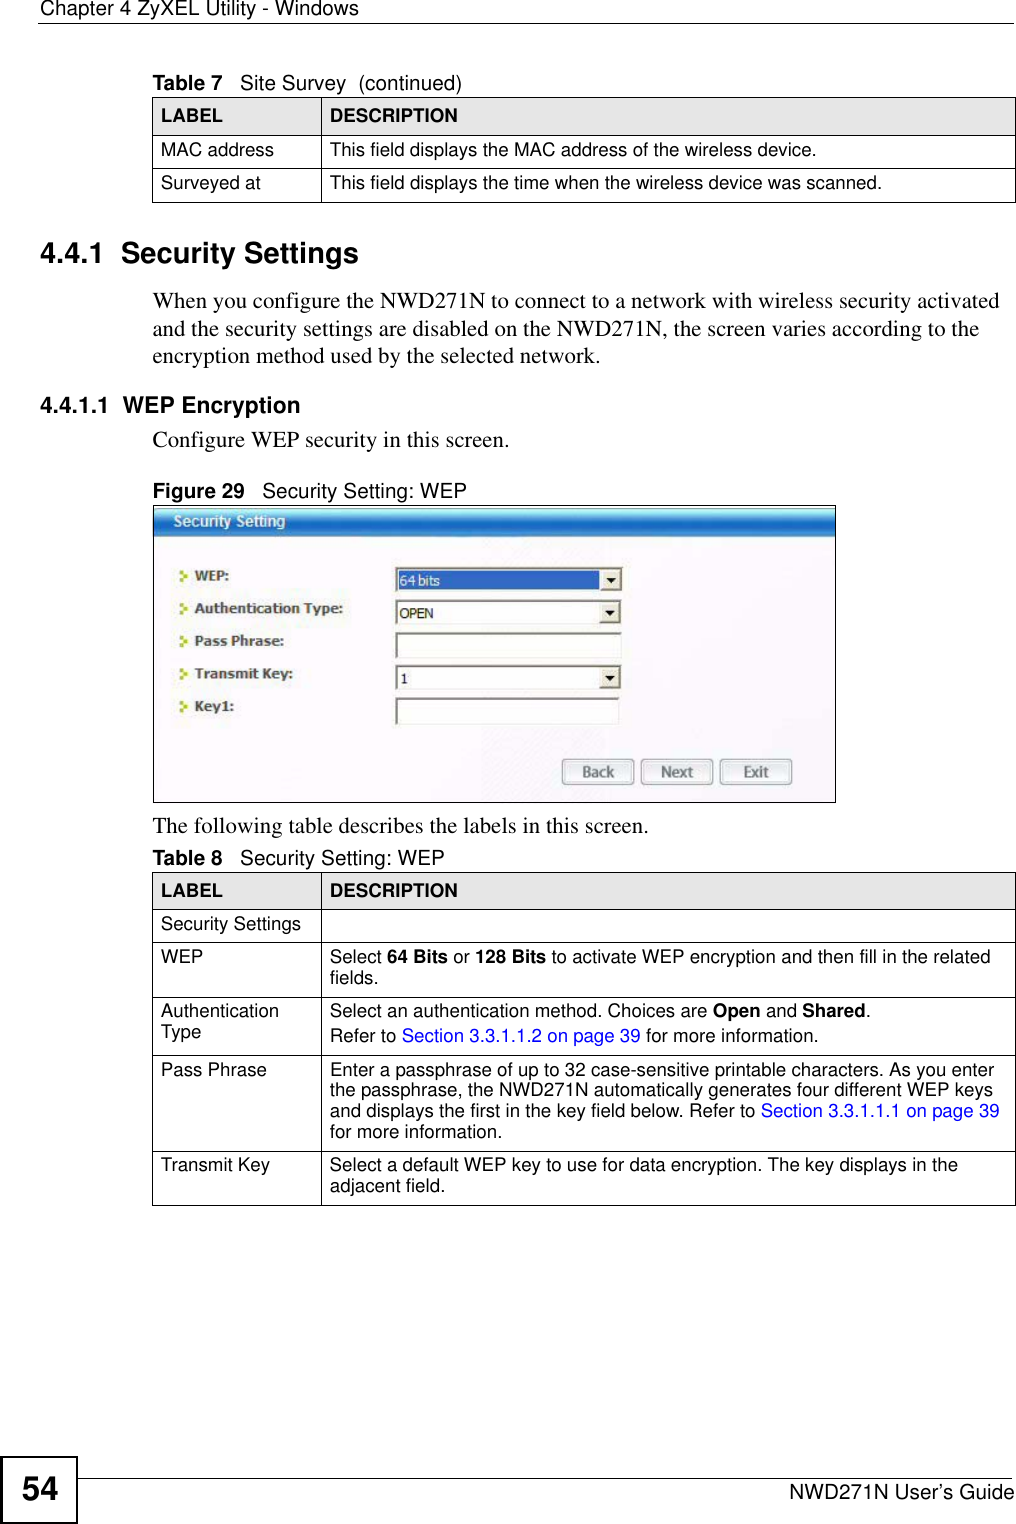 Chapter 4 ZyXEL Utility - WindowsNWD271N User’s Guide544.4.1  Security Settings When you configure the NWD271N to connect to a network with wireless security activated and the security settings are disabled on the NWD271N, the screen varies according to the encryption method used by the selected network.4.4.1.1  WEP EncryptionConfigure WEP security in this screen. Figure 29   Security Setting: WEP  The following table describes the labels in this screen.  MAC address  This field displays the MAC address of the wireless device.Surveyed at  This field displays the time when the wireless device was scanned.Table 7   Site Survey  (continued)LABEL DESCRIPTIONTable 8   Security Setting: WEP LABEL DESCRIPTIONSecurity SettingsWEP Select 64 Bits or 128 Bits to activate WEP encryption and then fill in the related fields.Authentication Type Select an authentication method. Choices are Open and Shared.Refer to Section 3.3.1.1.2 on page 39 for more information.Pass Phrase Enter a passphrase of up to 32 case-sensitive printable characters. As you enter the passphrase, the NWD271N automatically generates four different WEP keys and displays the first in the key field below. Refer to Section 3.3.1.1.1 on page 39 for more information.Transmit Key Select a default WEP key to use for data encryption. The key displays in the adjacent field.